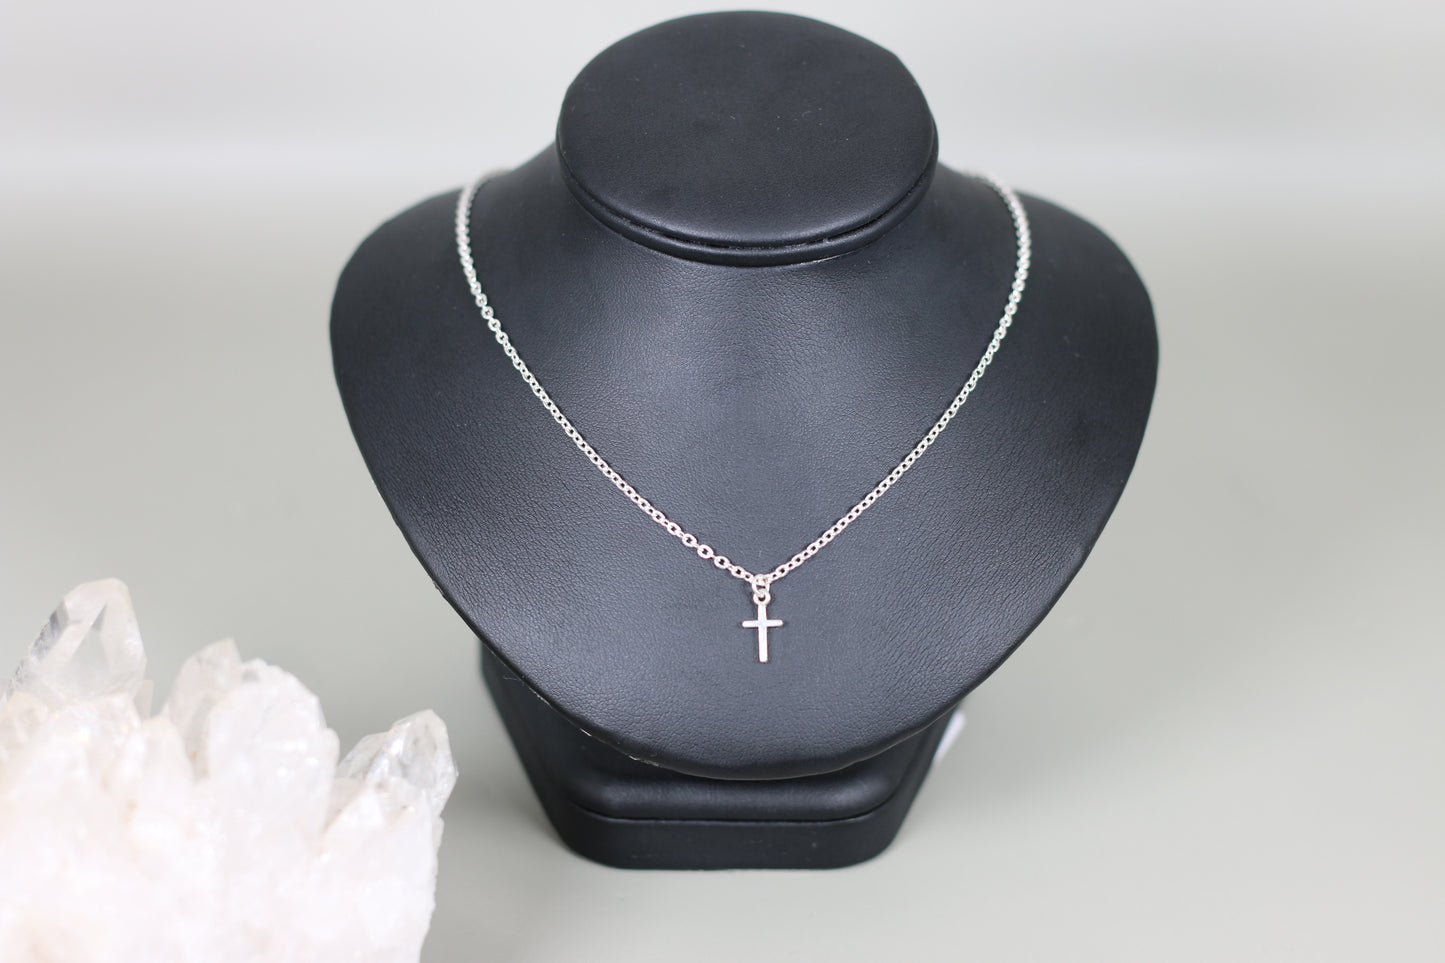 Cross Sterling Silver Pendant 16" Flat Cable Necklace with Sterling Silver Components - Annabel's Jewelry & Leather